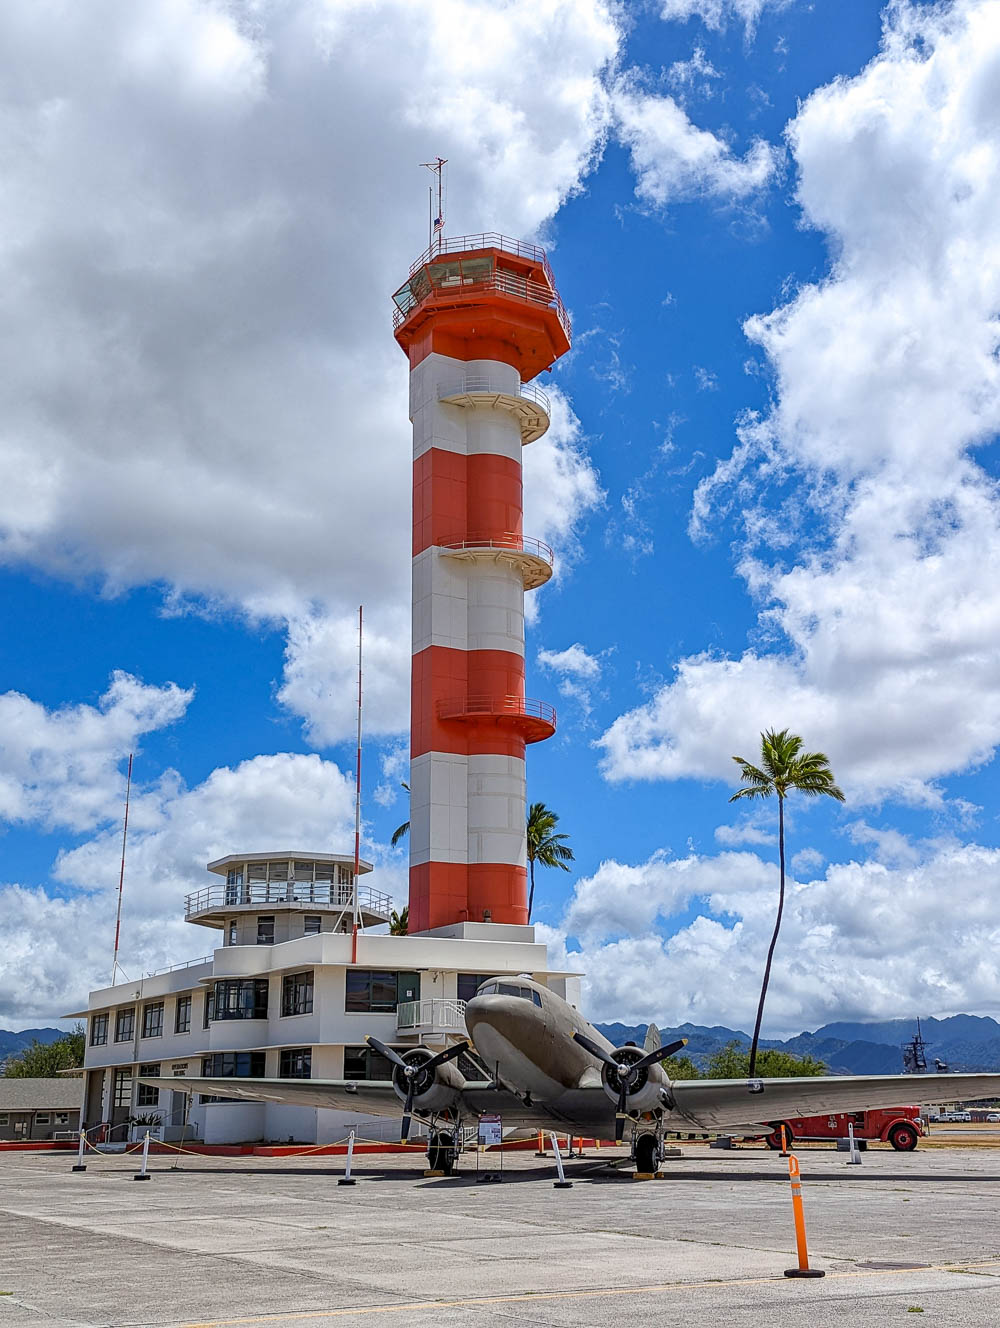 orange and white striped air control tower